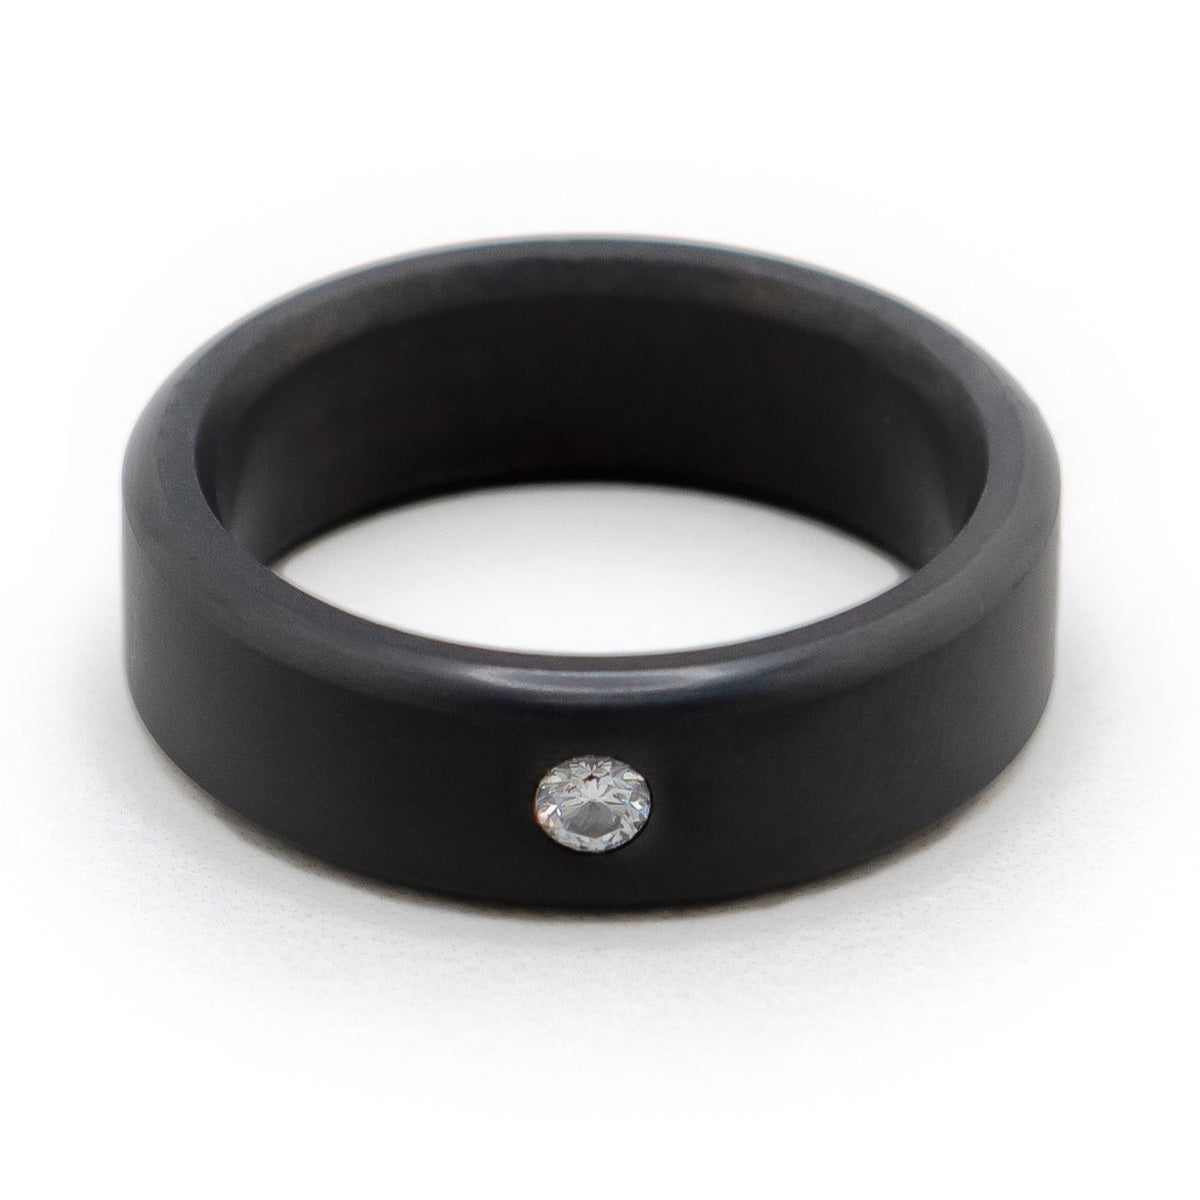 Kratos Rounded Diamond Inset Ring 7mm